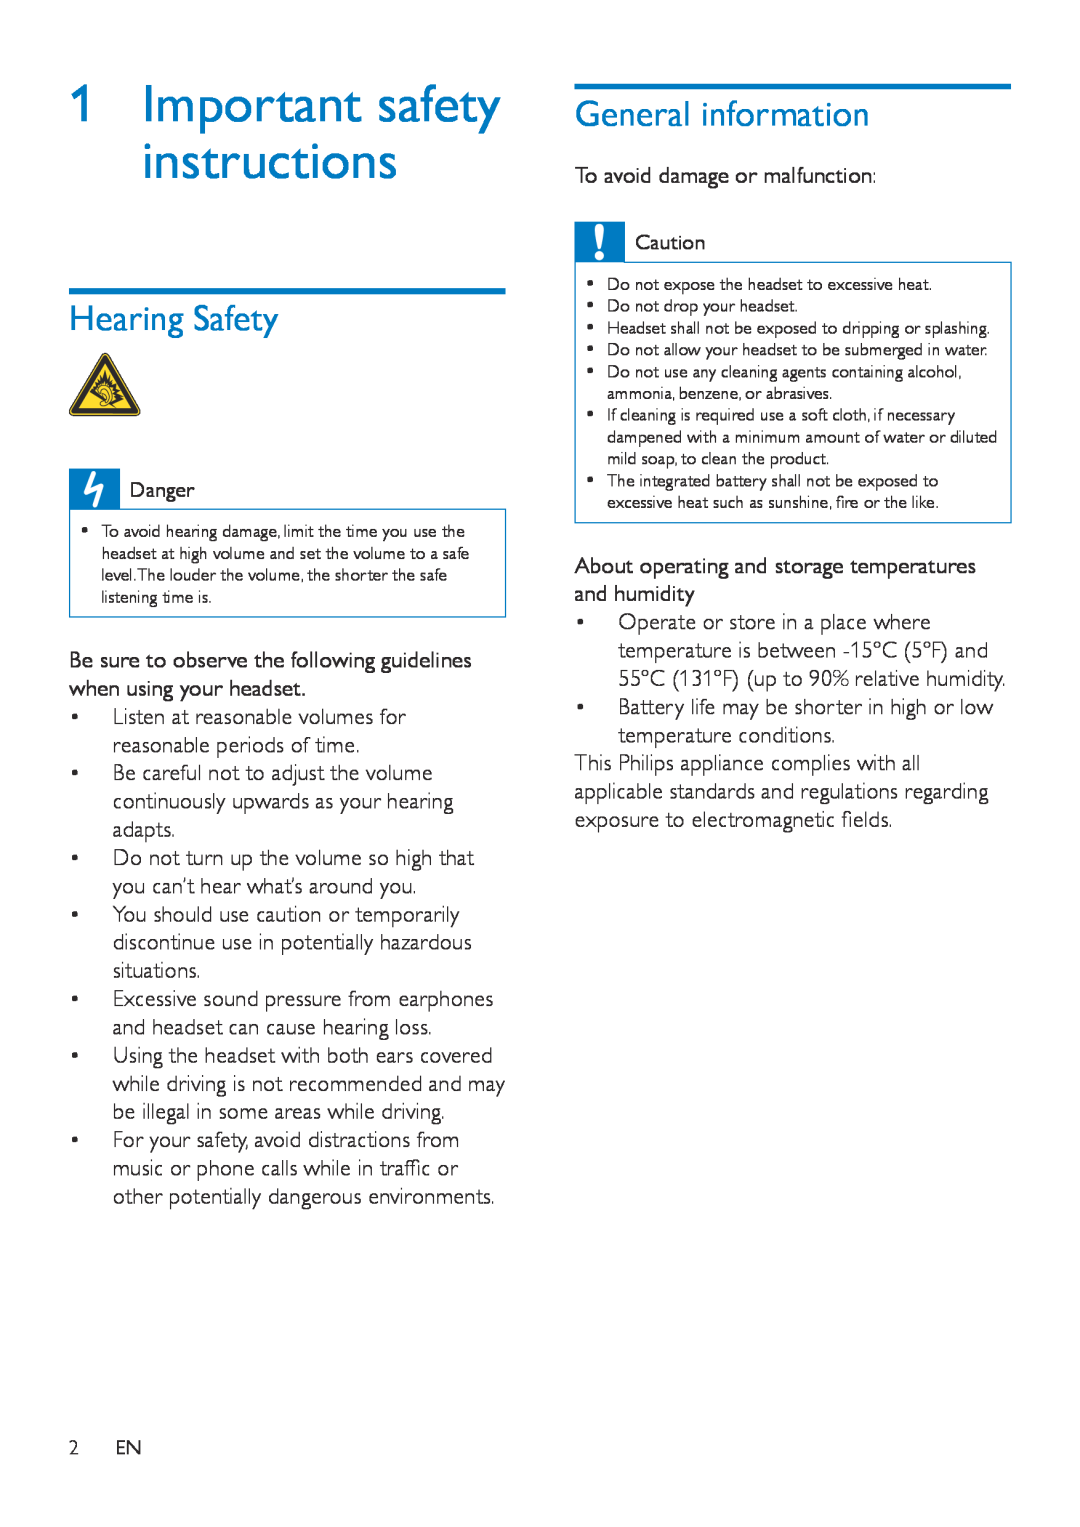 Philips SHB8000 user manual 1Important safety instructions, Hearing Safety, General information 